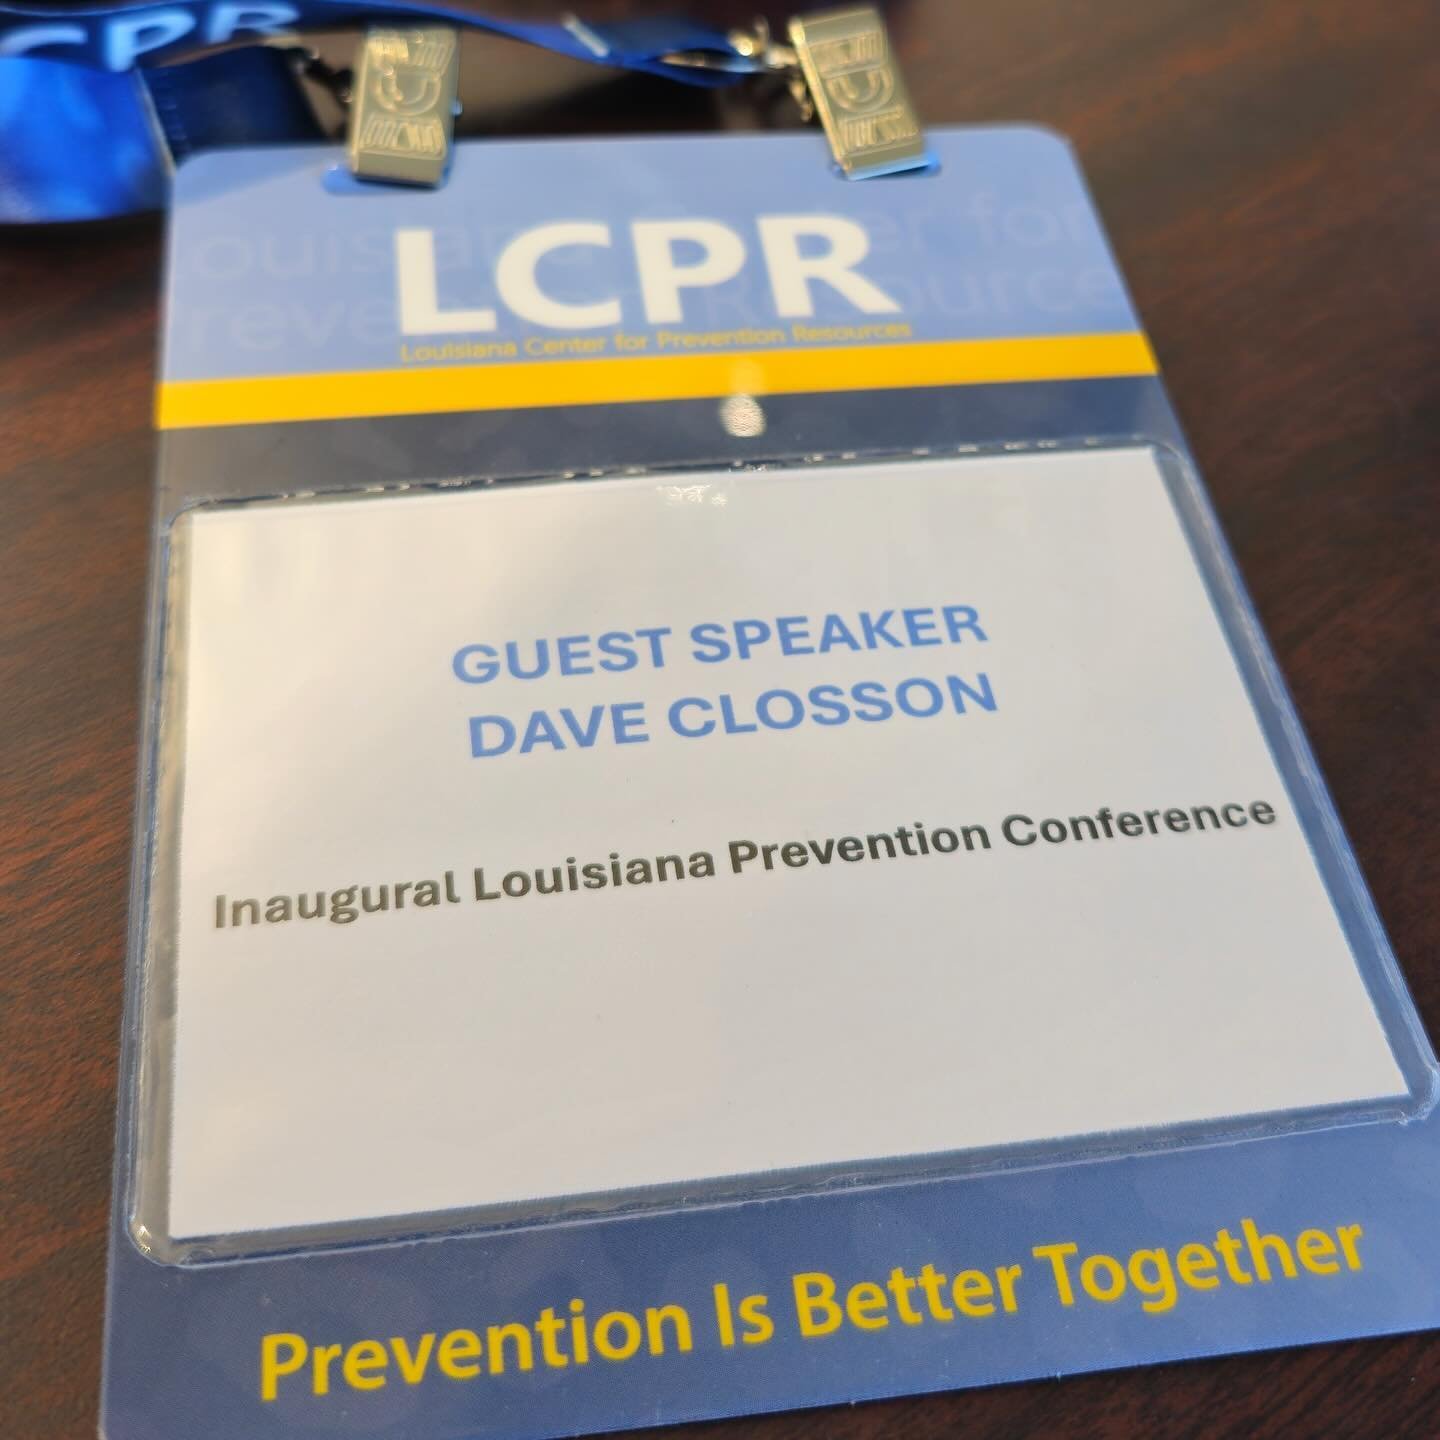 Last month, I had the incredible opportunity to present at LCPR&rsquo;s event, &ldquo;Prevention through the Lens of Digital Media.&rdquo; My session, &ldquo;From Awareness to Action: Digital Marketing&rsquo;s Role in Destigmatizing Mental Health for